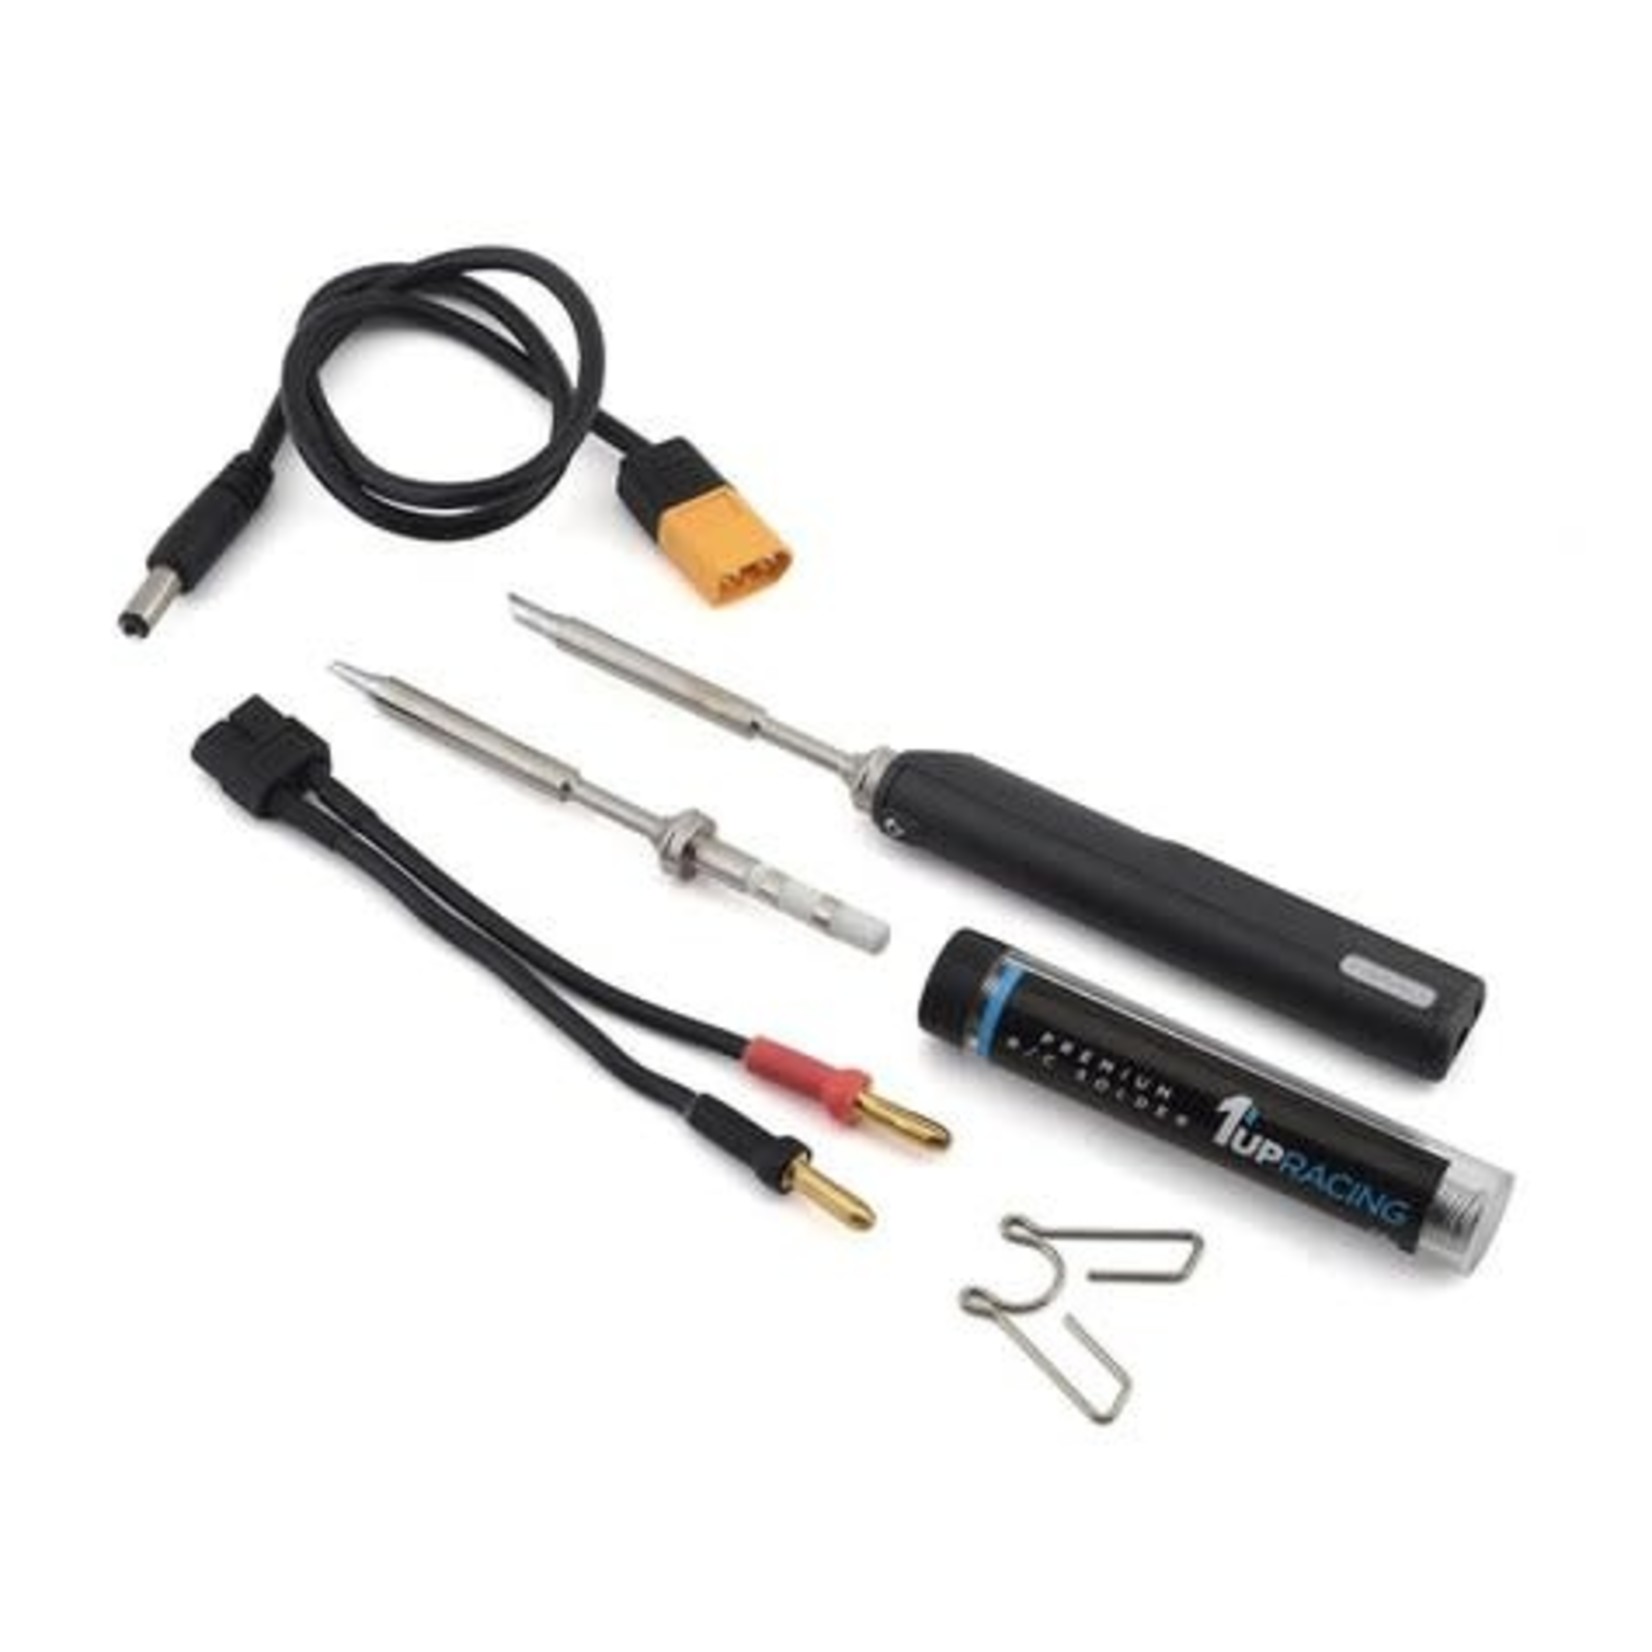 1UP Racing 1UP Racing TS100 Pro Pit Soldering Iron w/DC Cable & Leather Pouch #190106